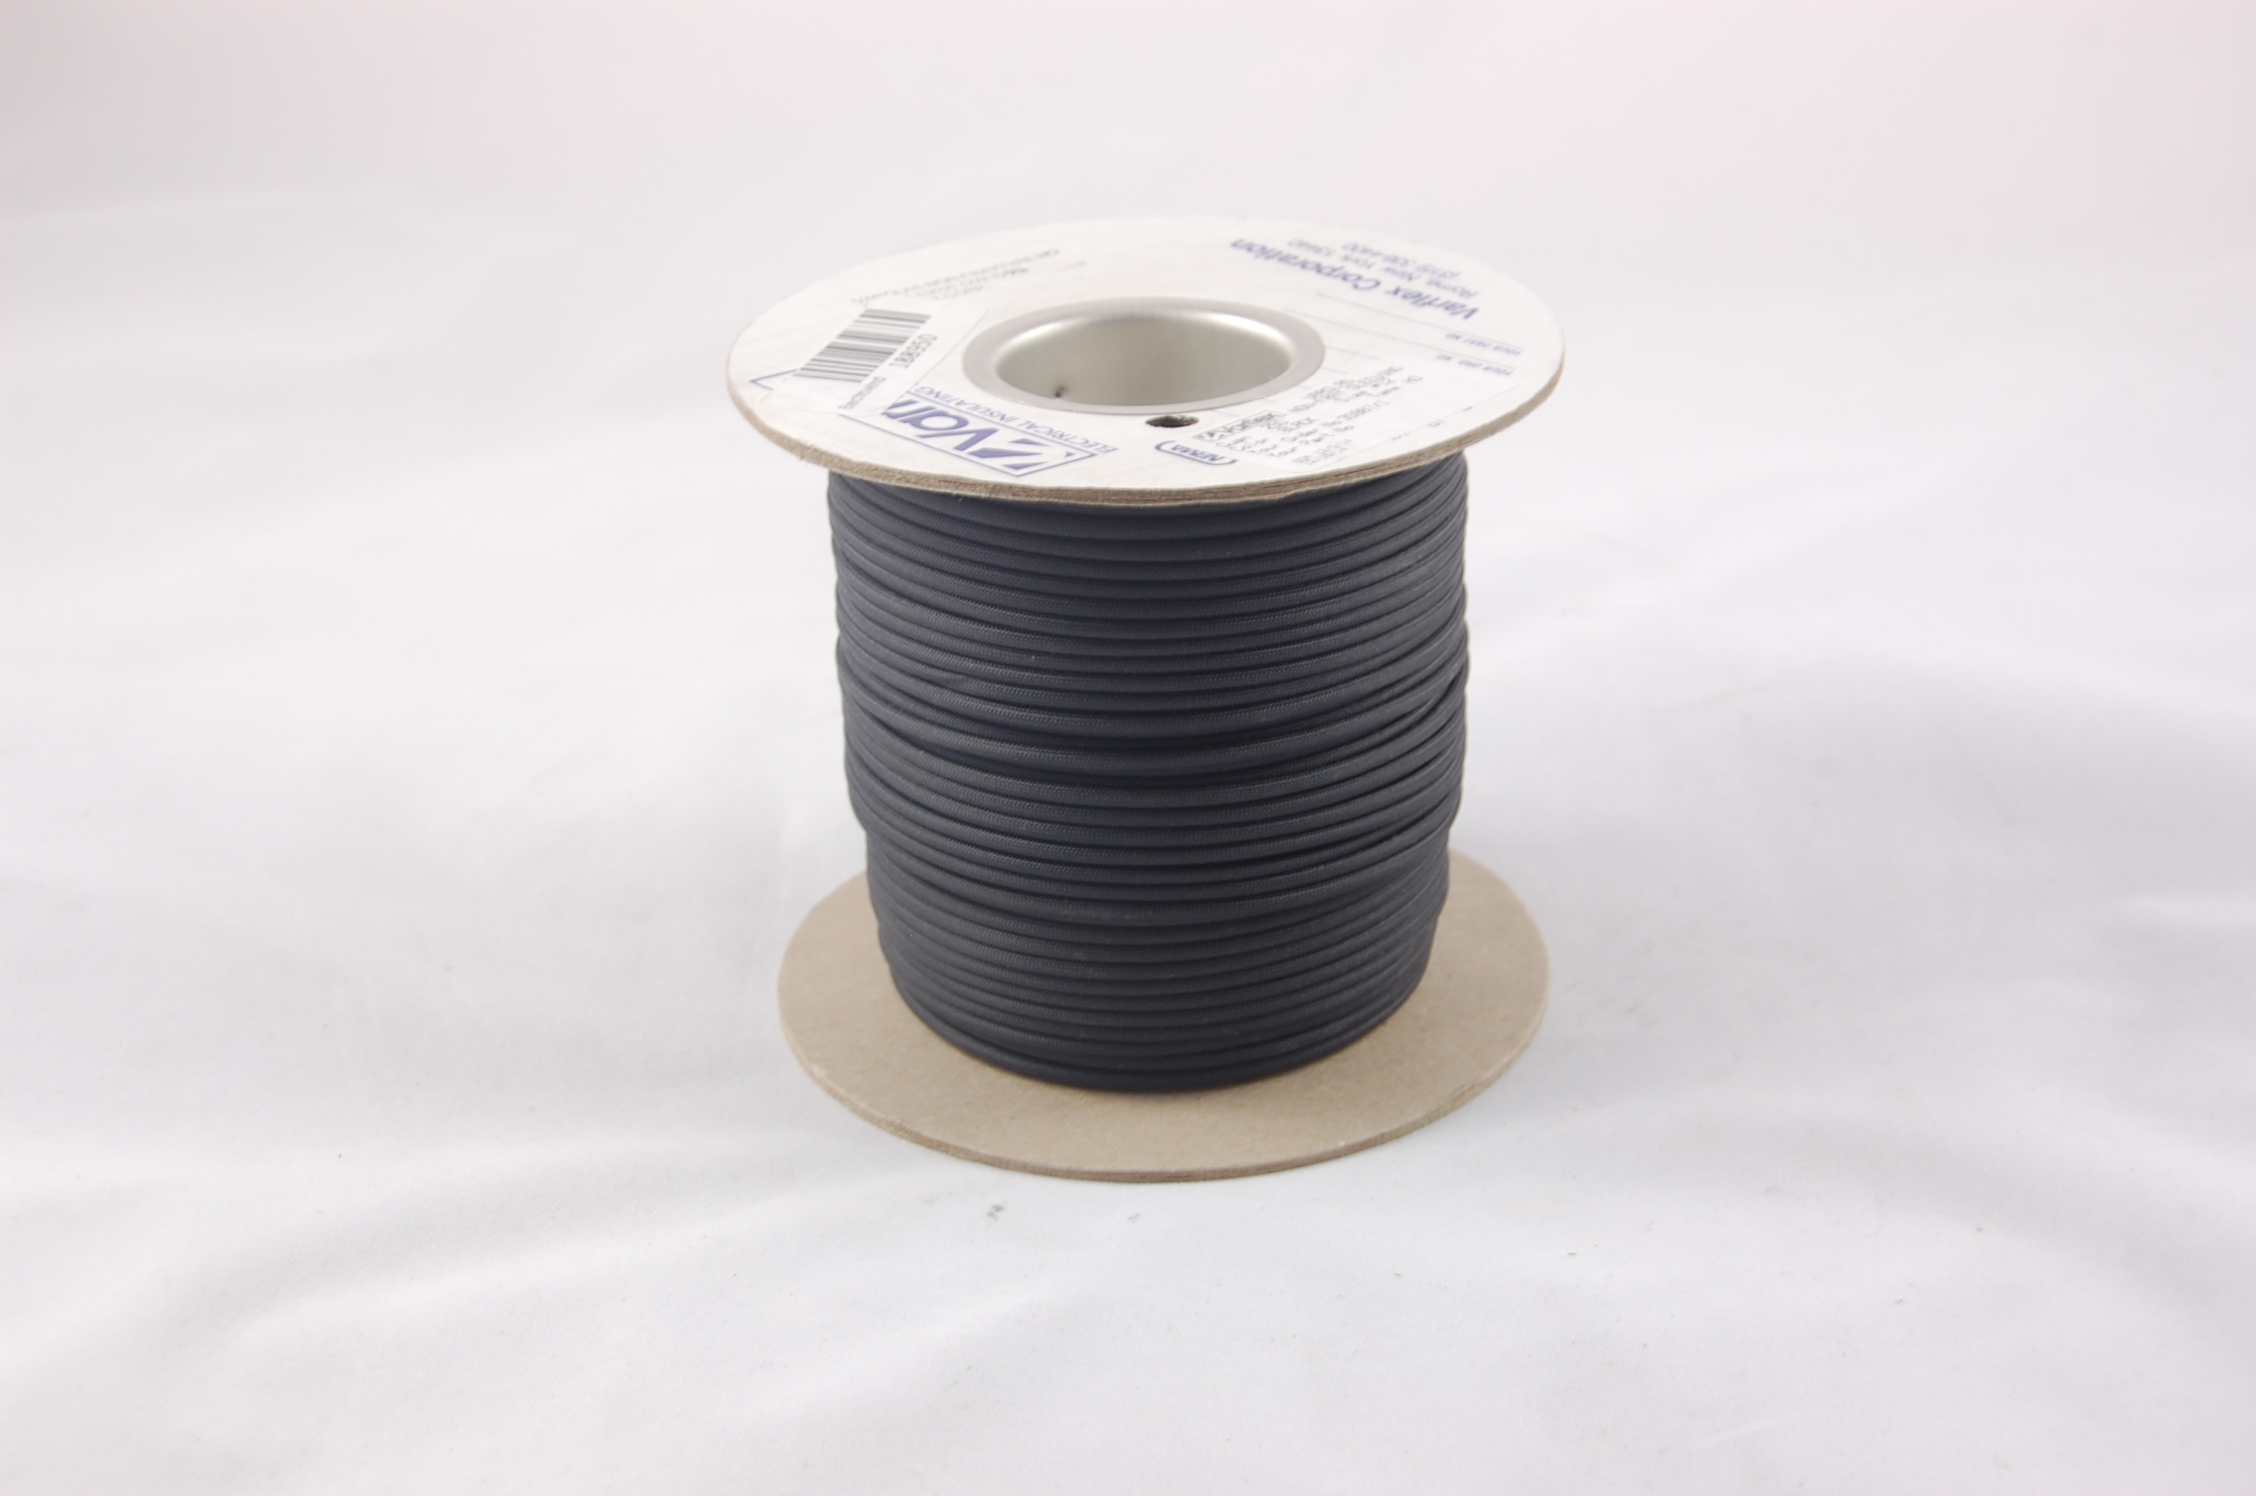 #14 AWG Varglas Type HO Heat-Cleaned and Treated High Temperature Non-Fray Flexible Fiberglass Sleeving , black, 500 FT per spool